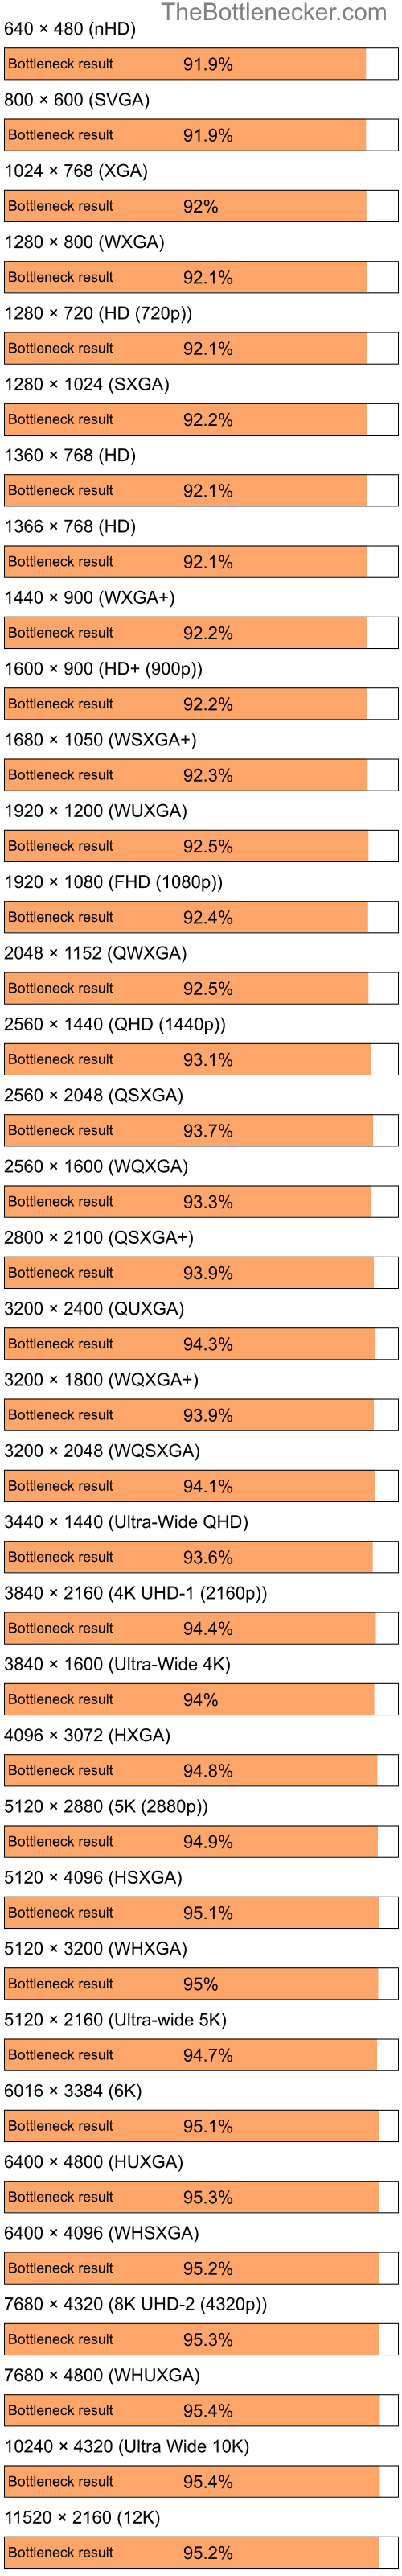 Bottleneck results by resolution for Intel Pentium 4 and AMD Mobility Radeon 9000 in Graphic Card Intense Tasks